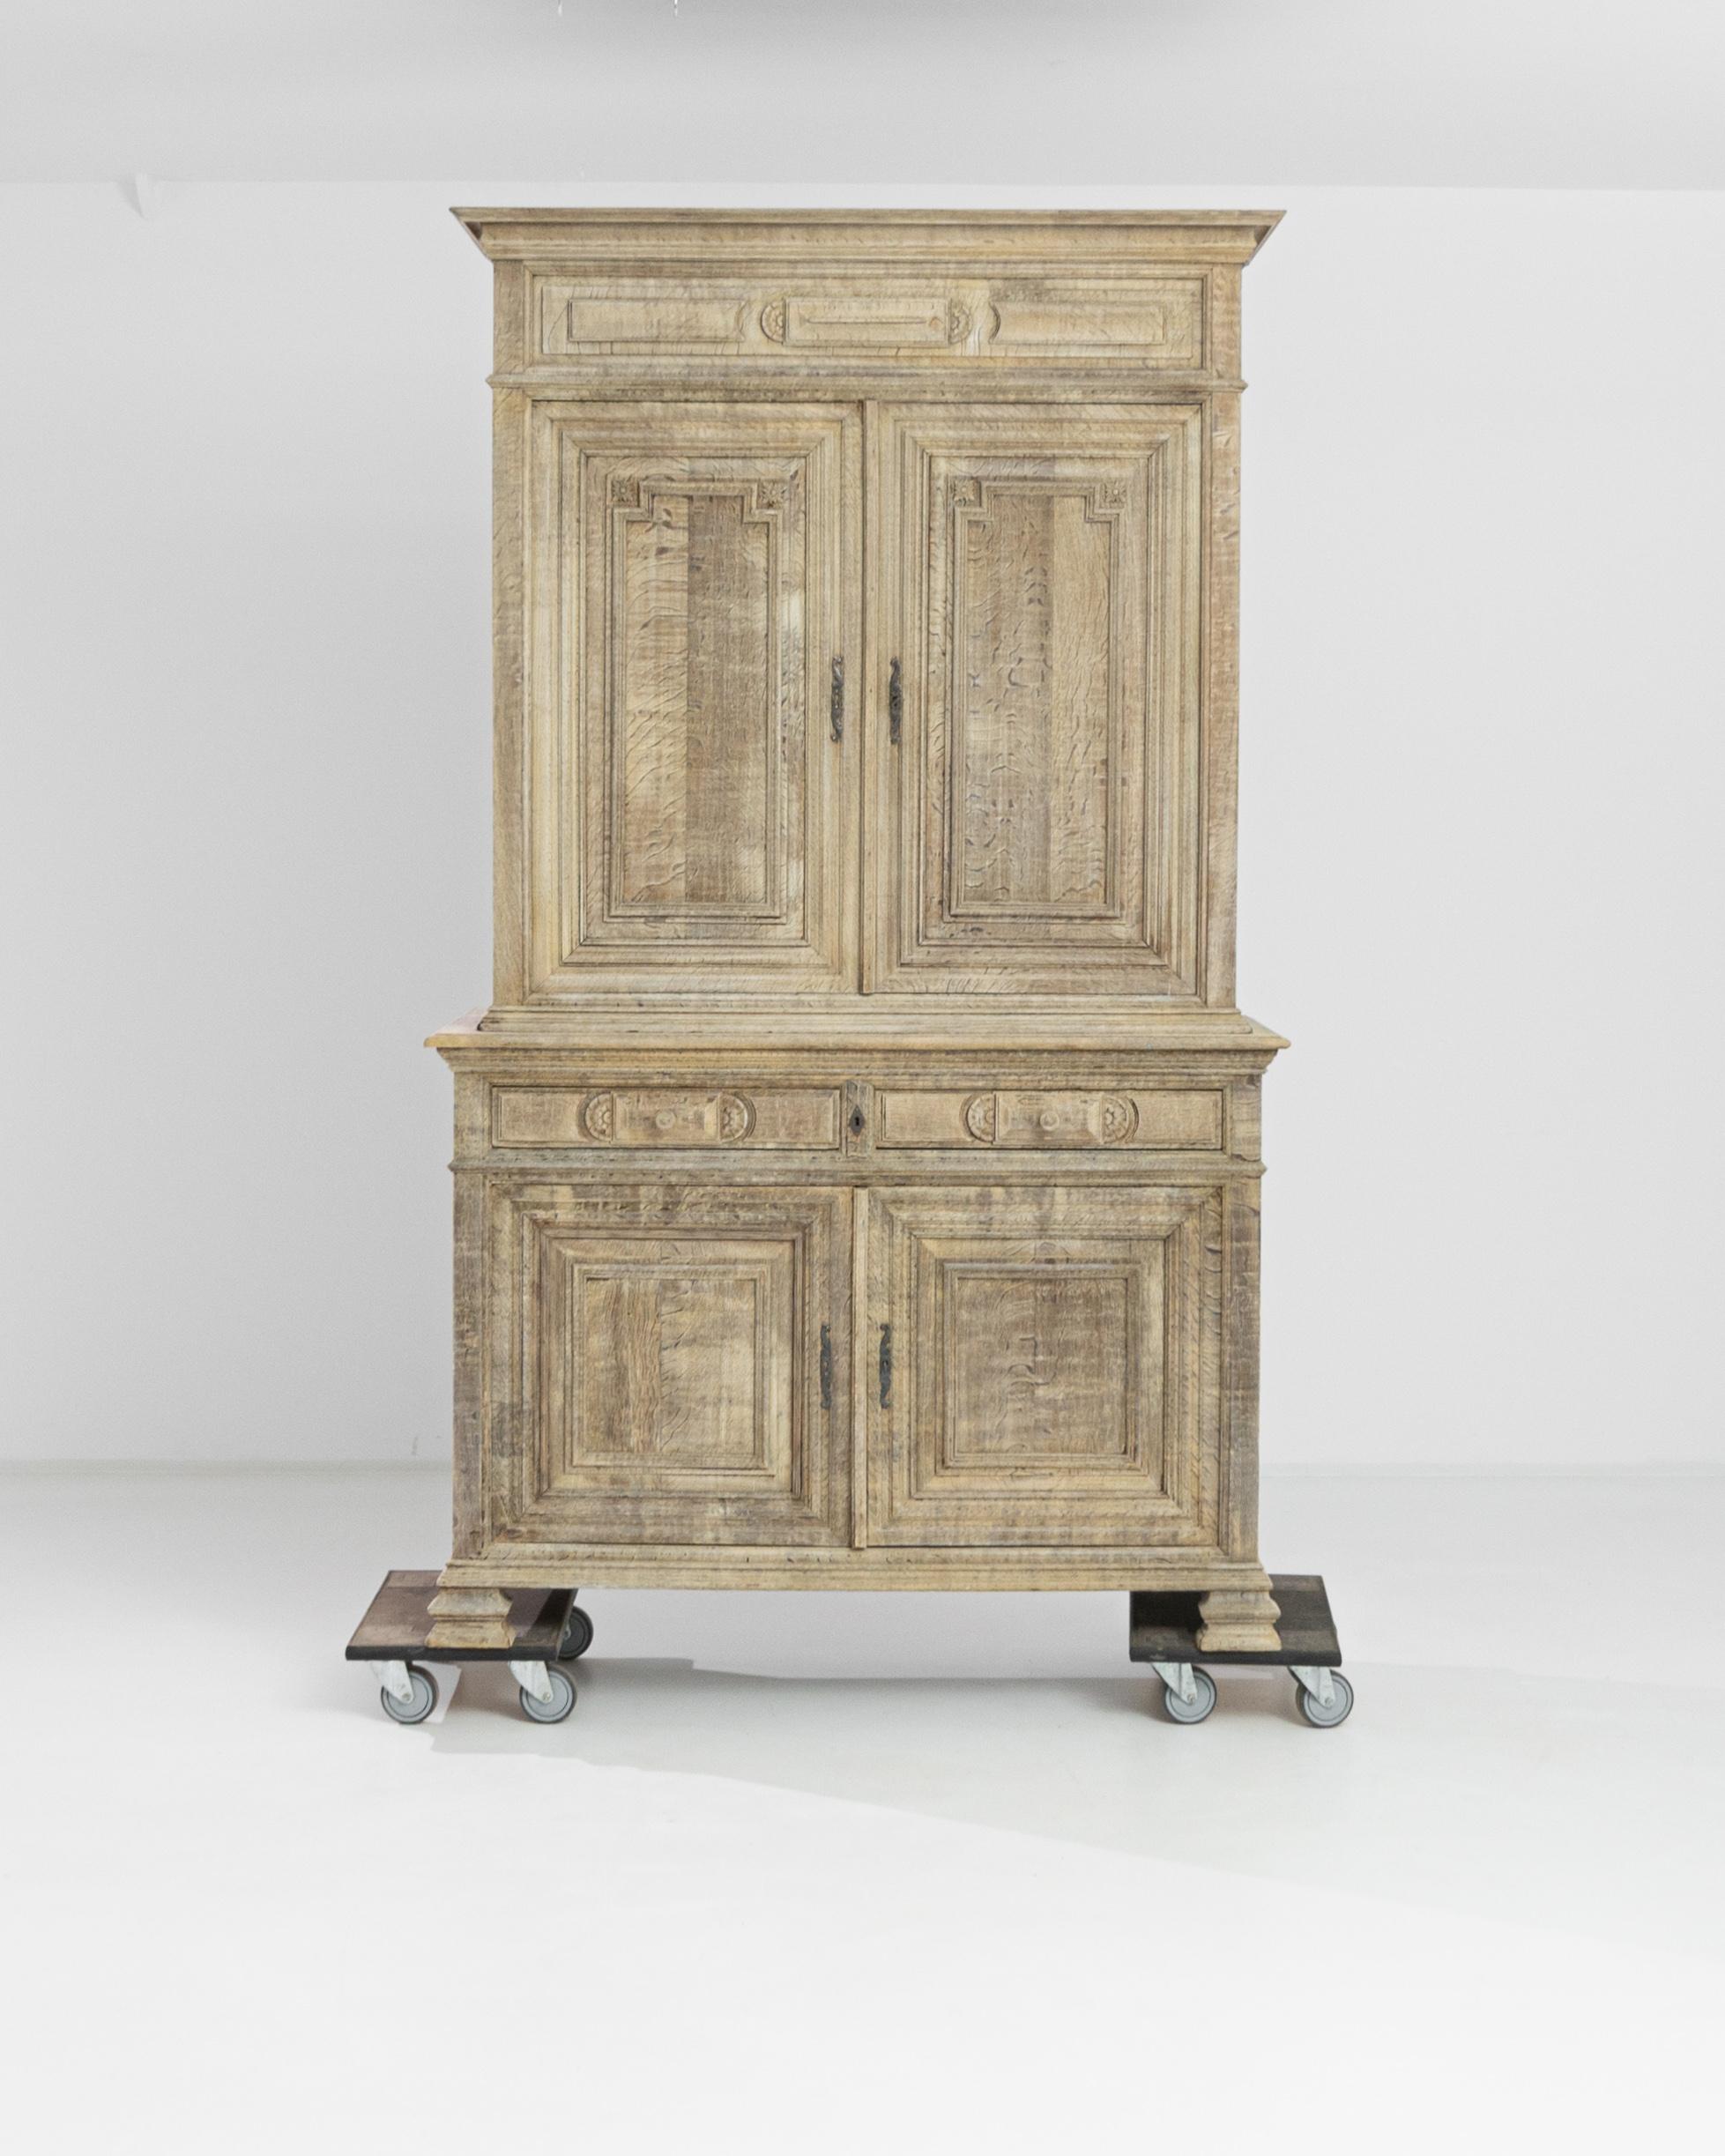 An antique cabinet from France, circa 1860, displaying a molded cornice, two front drawers, carved feet and an elegant carved case. The doors are ornamented with scrolled escutcheons, beveled lines and flower details, and open to reveal a powder